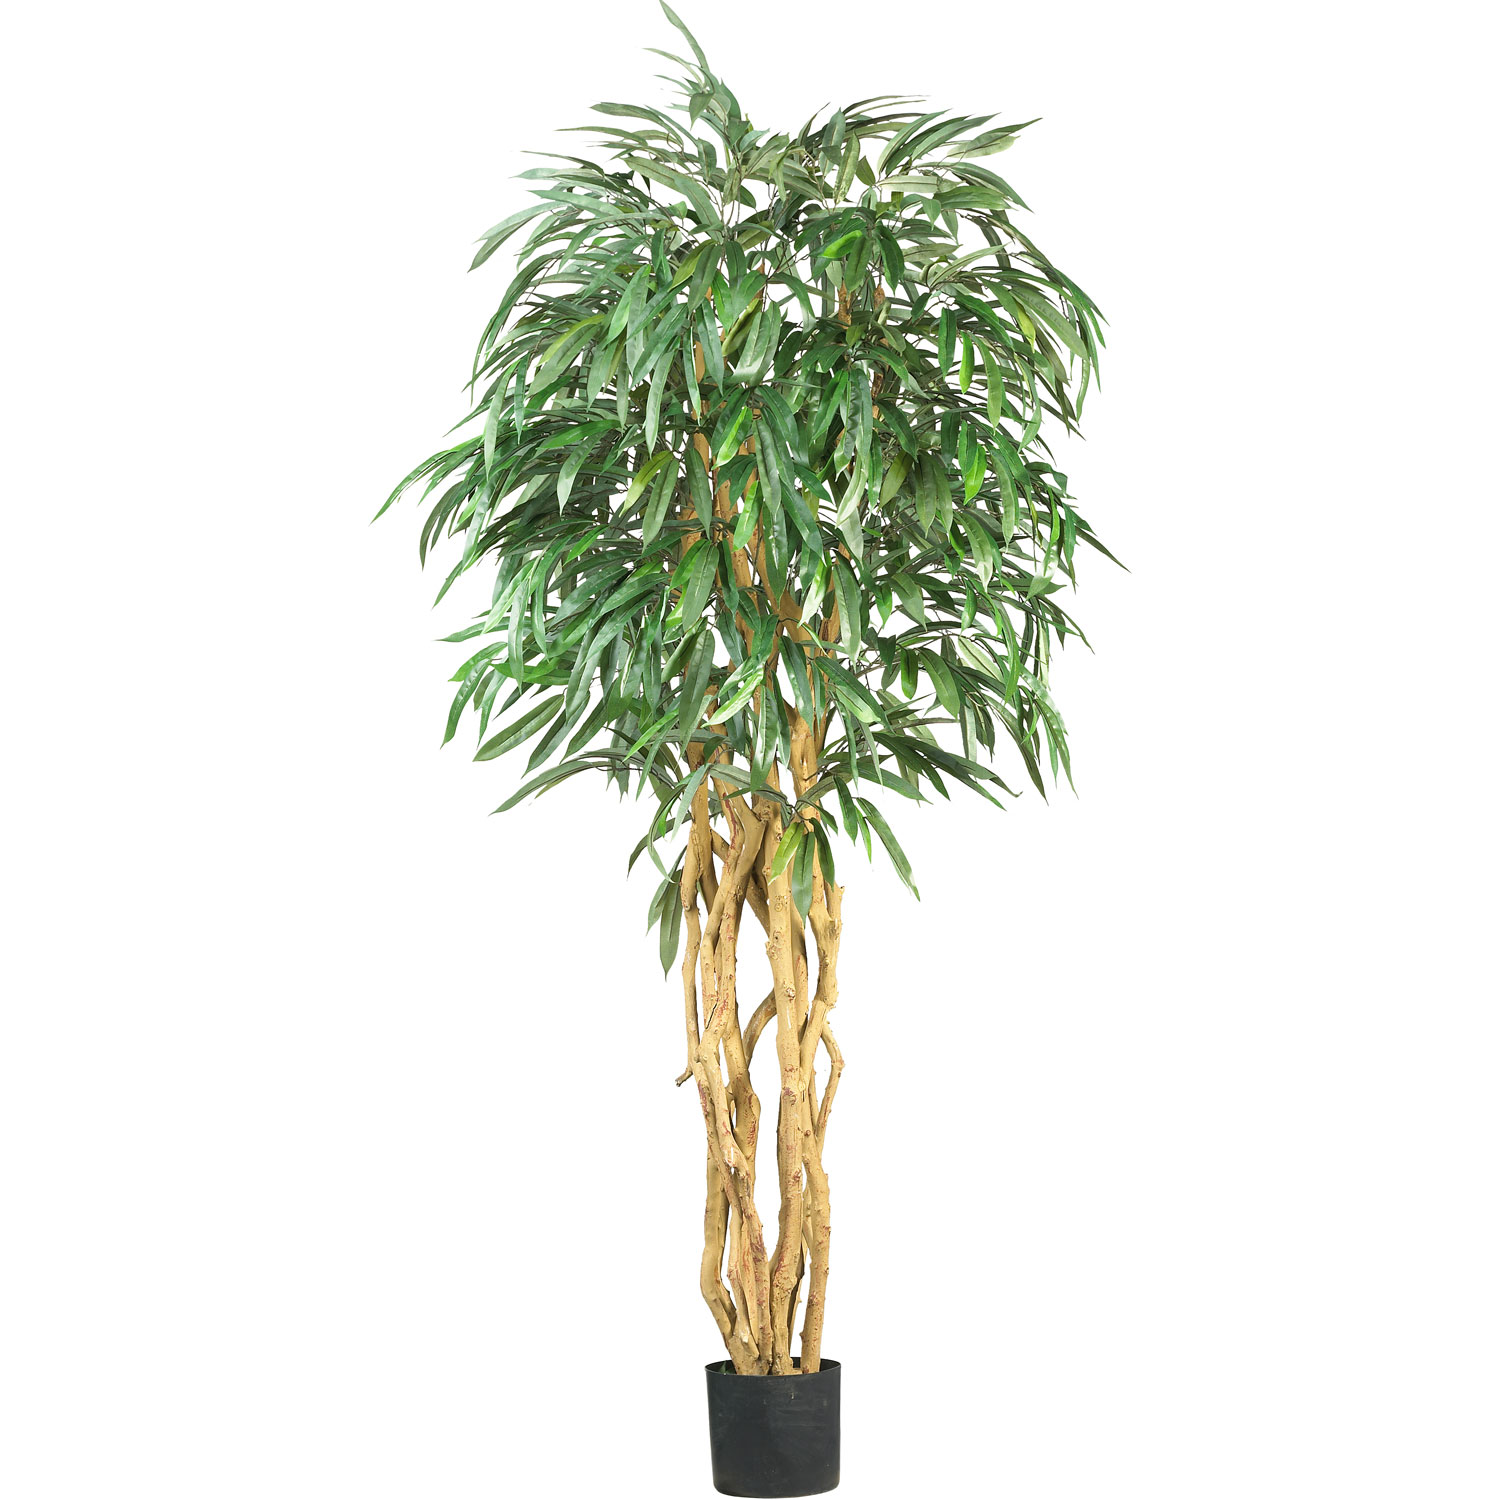 6 Foot Weeping Ficus Tree: Potted